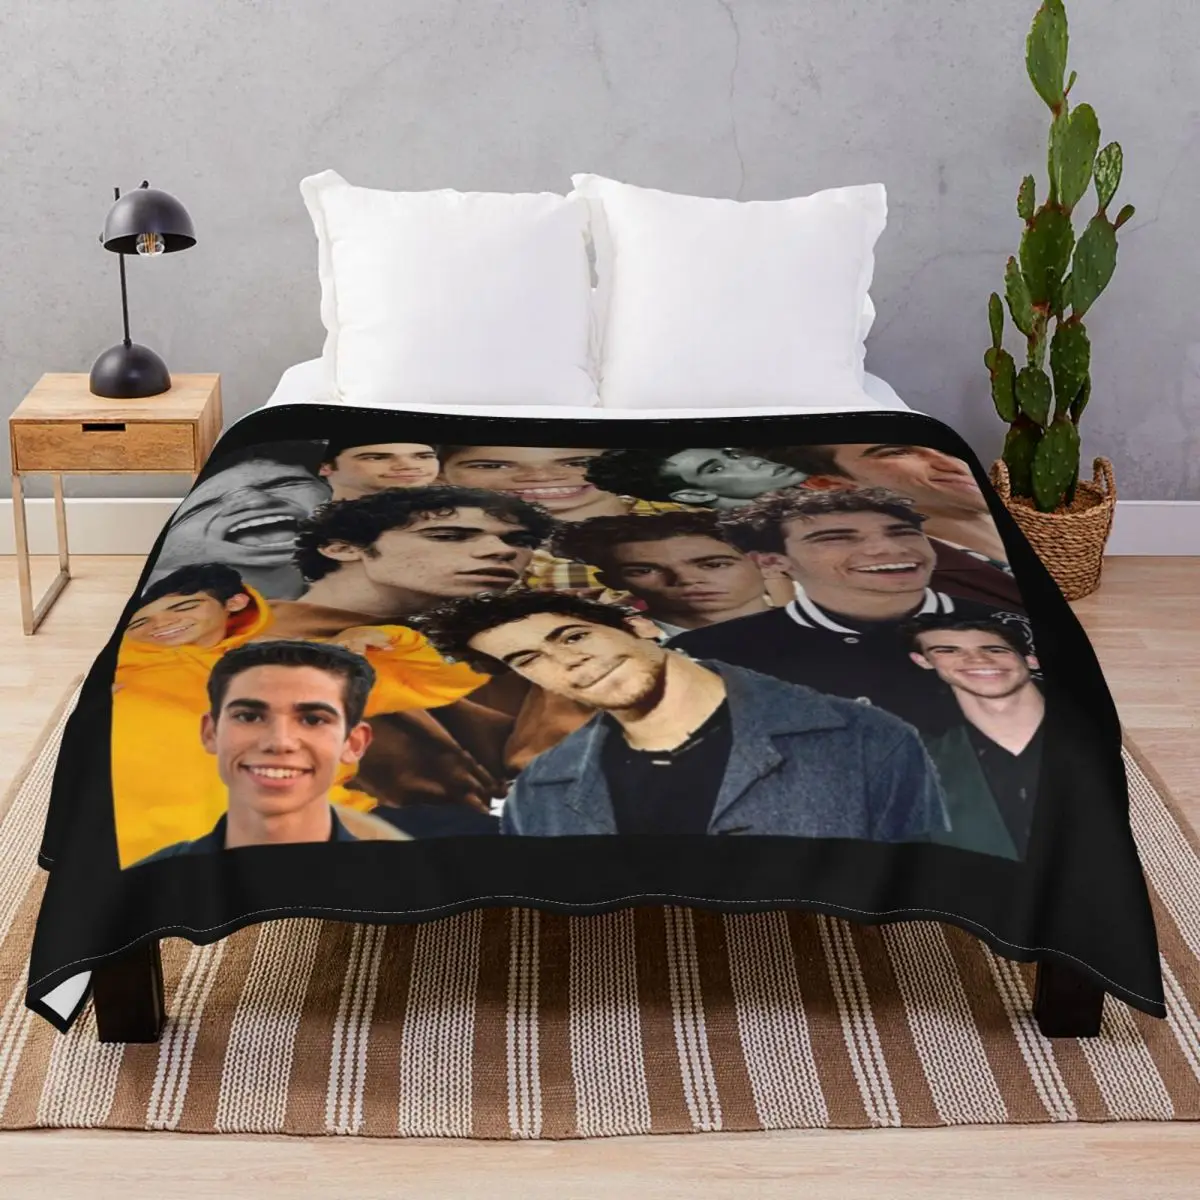 

Cameron Boyce Collage Blanket Coral Fleece Plush Decoration Fluffy Throw Blankets for Bed Sofa Travel Office